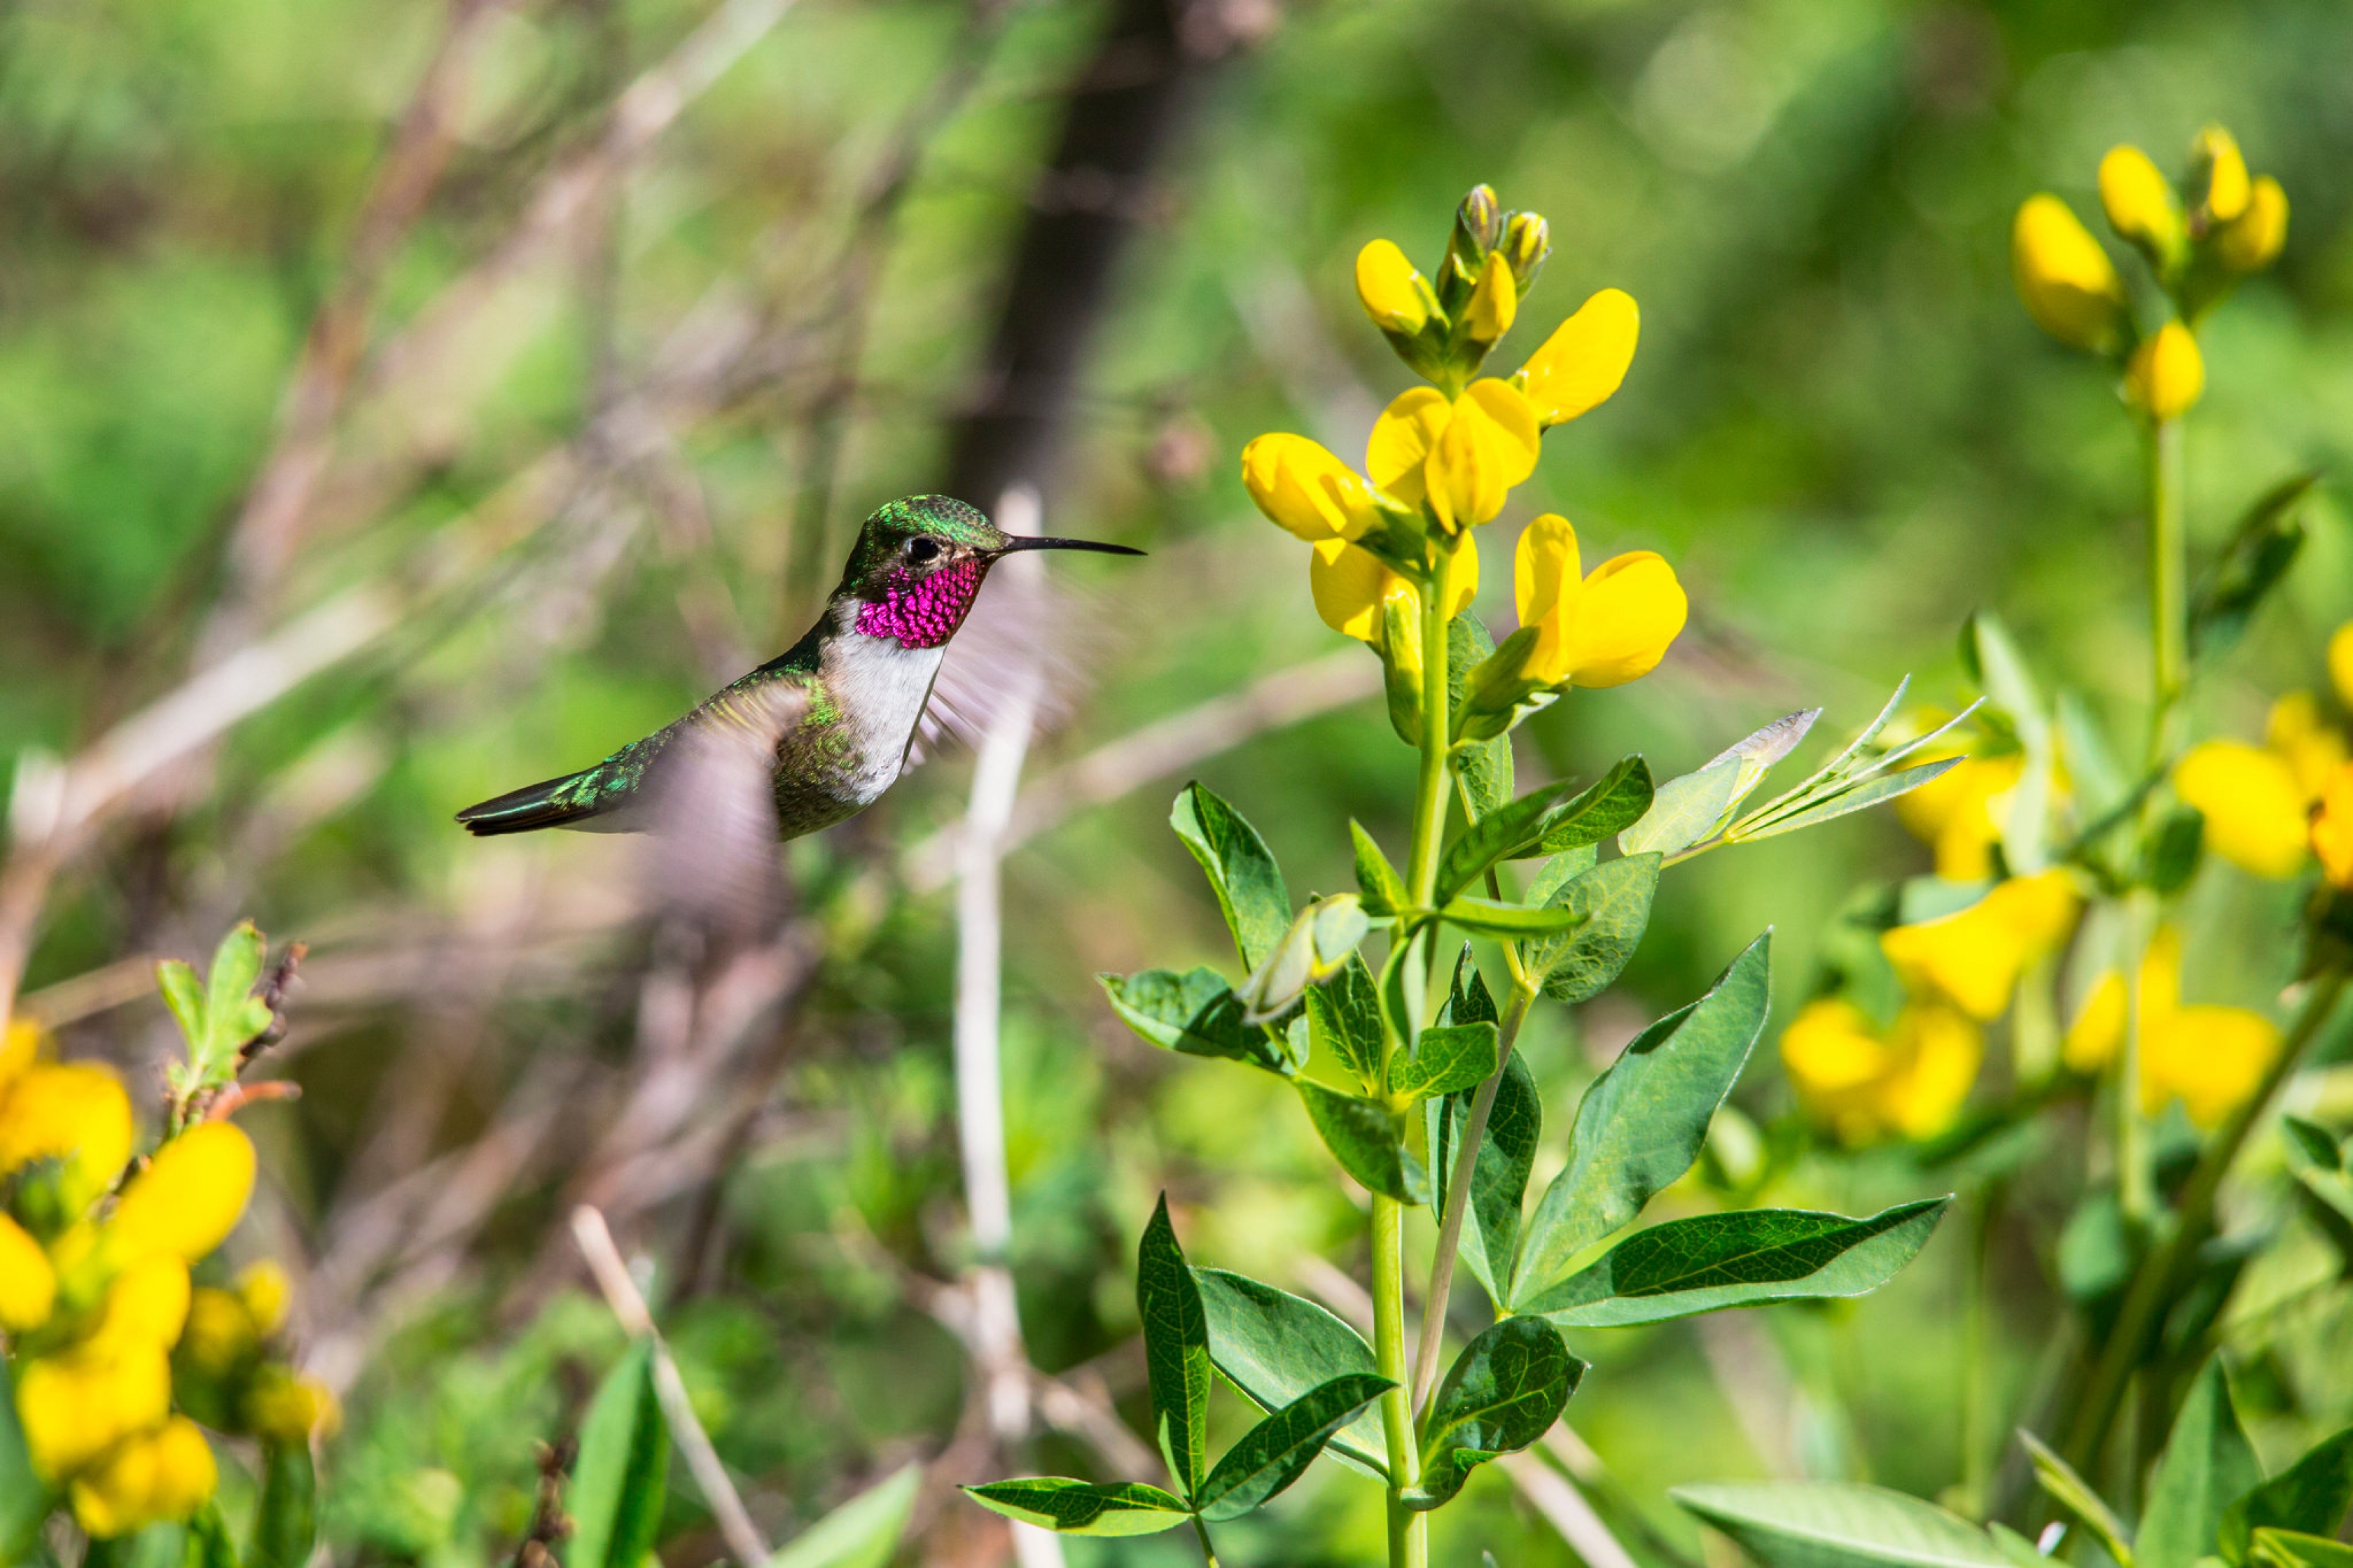 A broad tailed hummingbird in Rocky Mountain National Park.